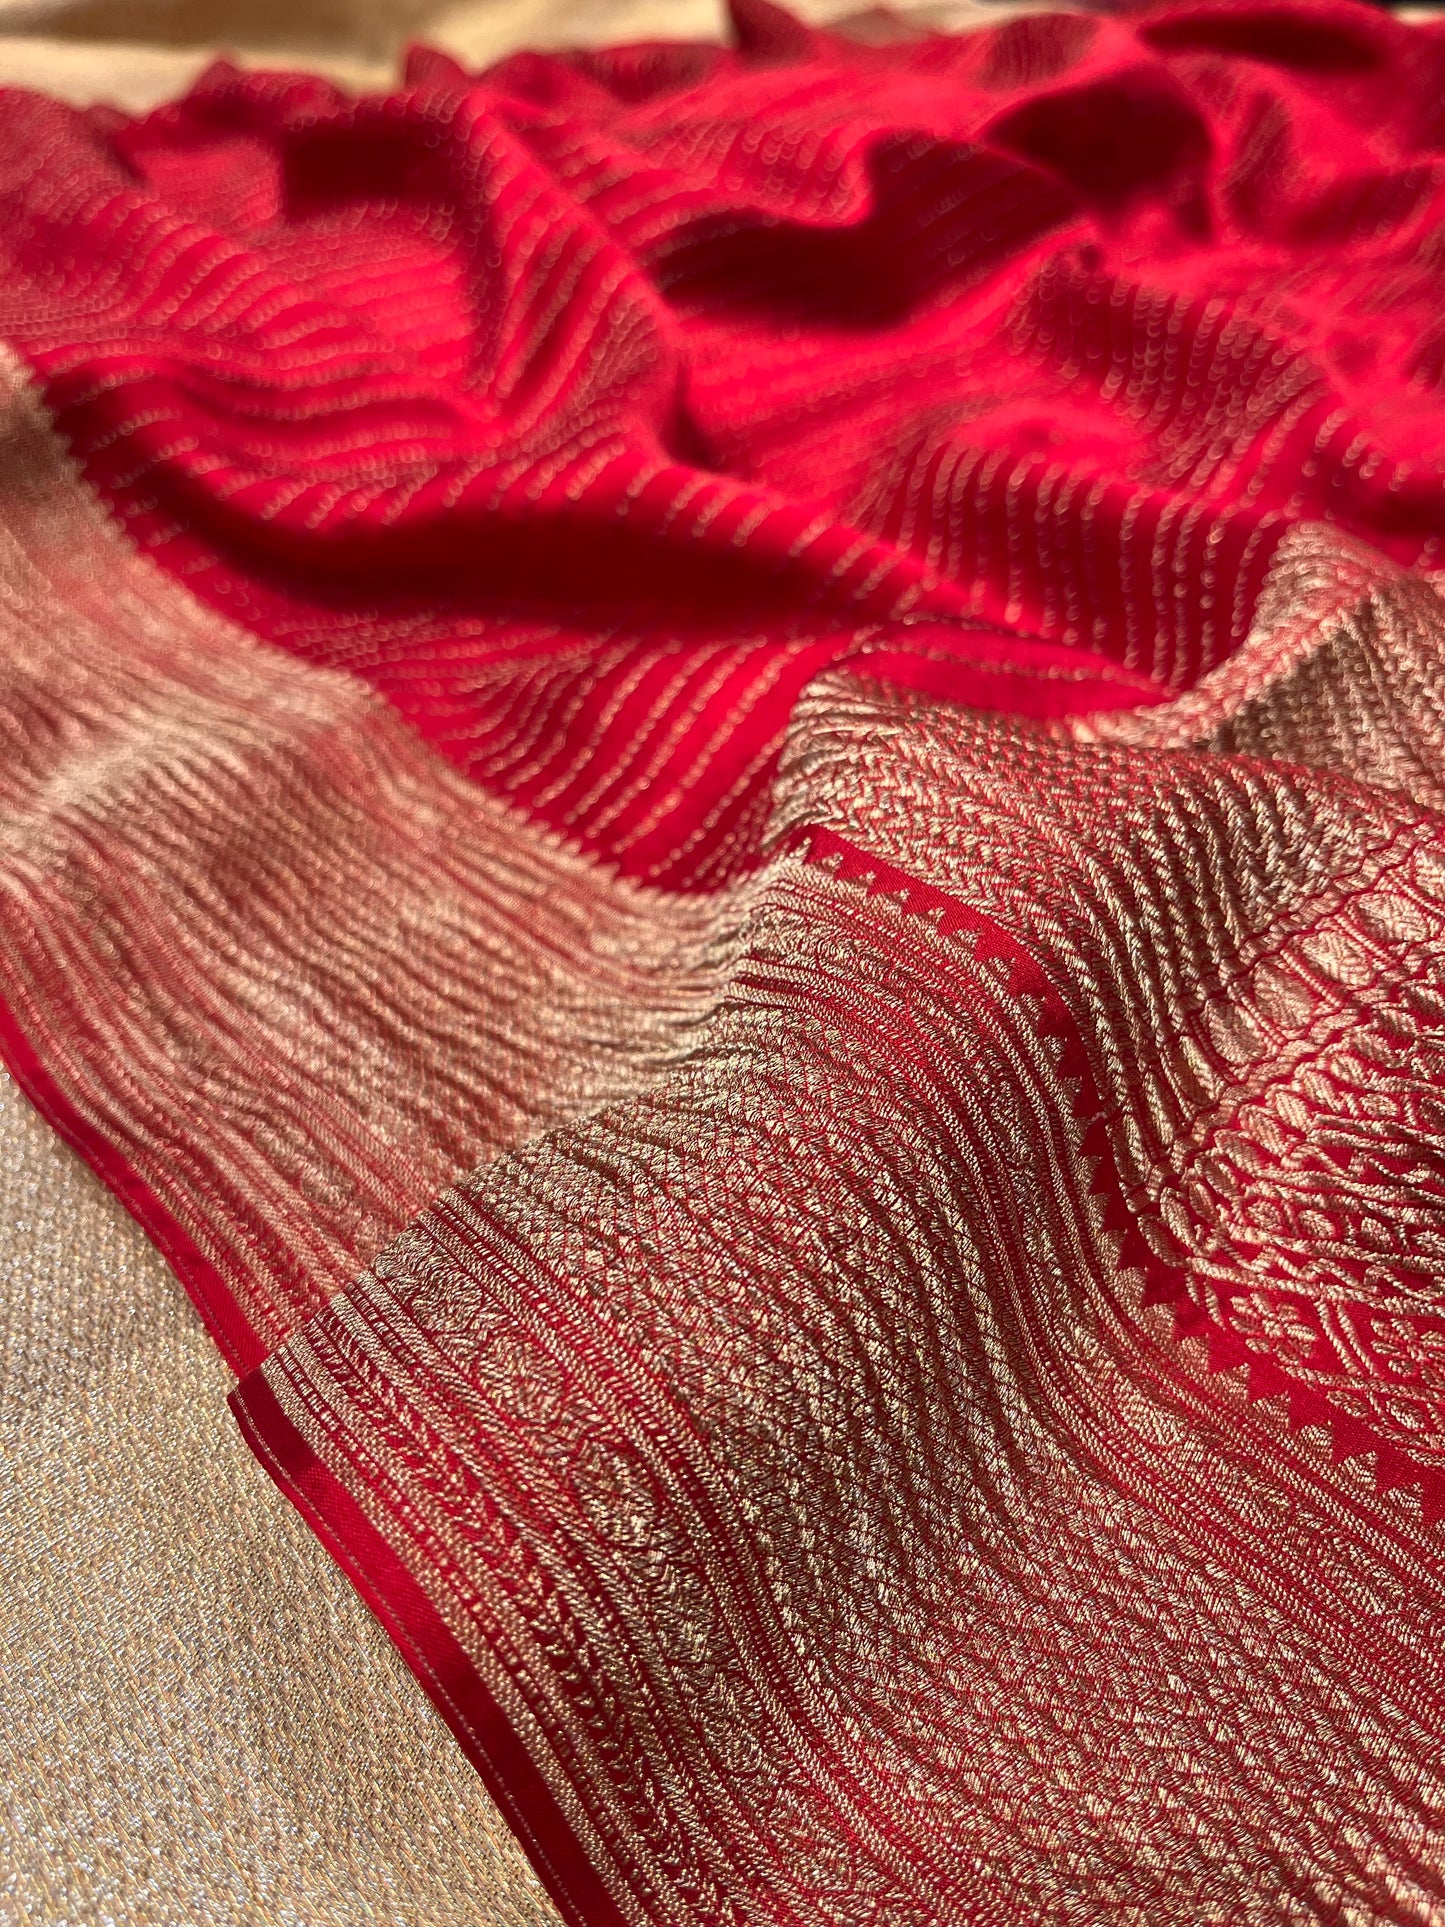 RED COLOUR MYSORE CREPE SILK SAREE EMBELLISHED WITH ZARI WEAVES